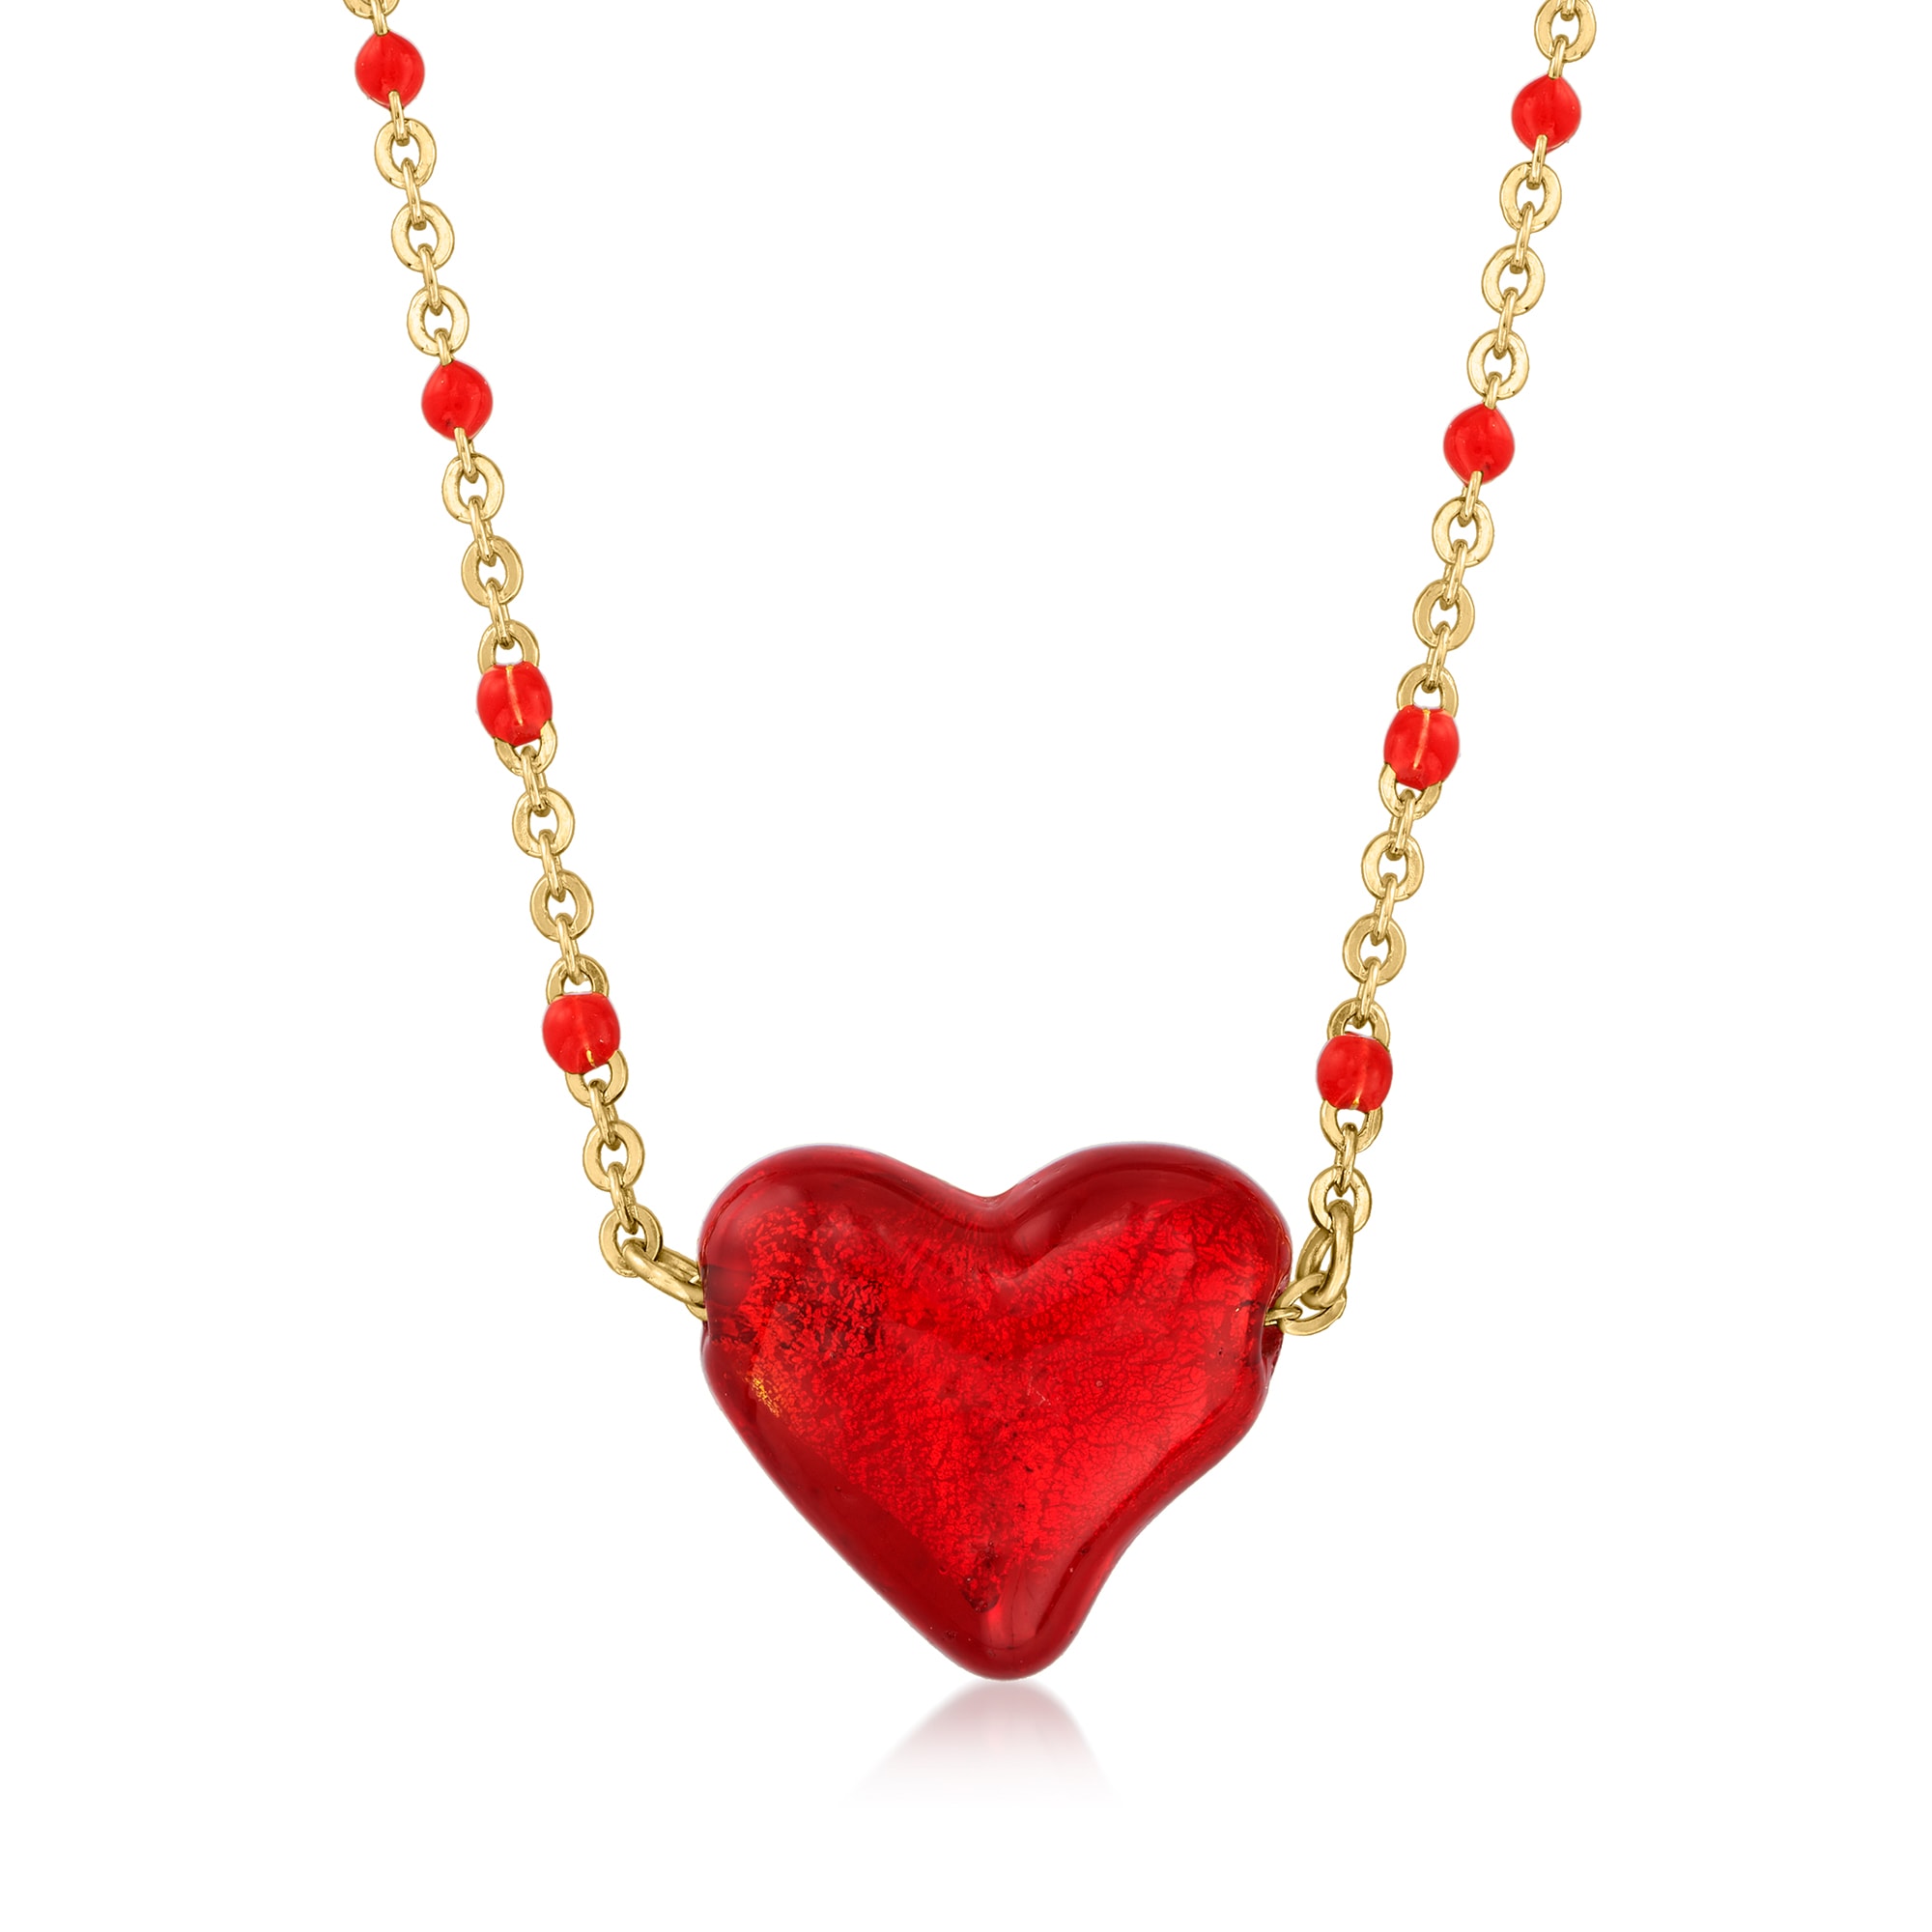 Italian Red Murano Glass Heart Bead Necklace In 18kt Gold Over Sterling Ross Simons